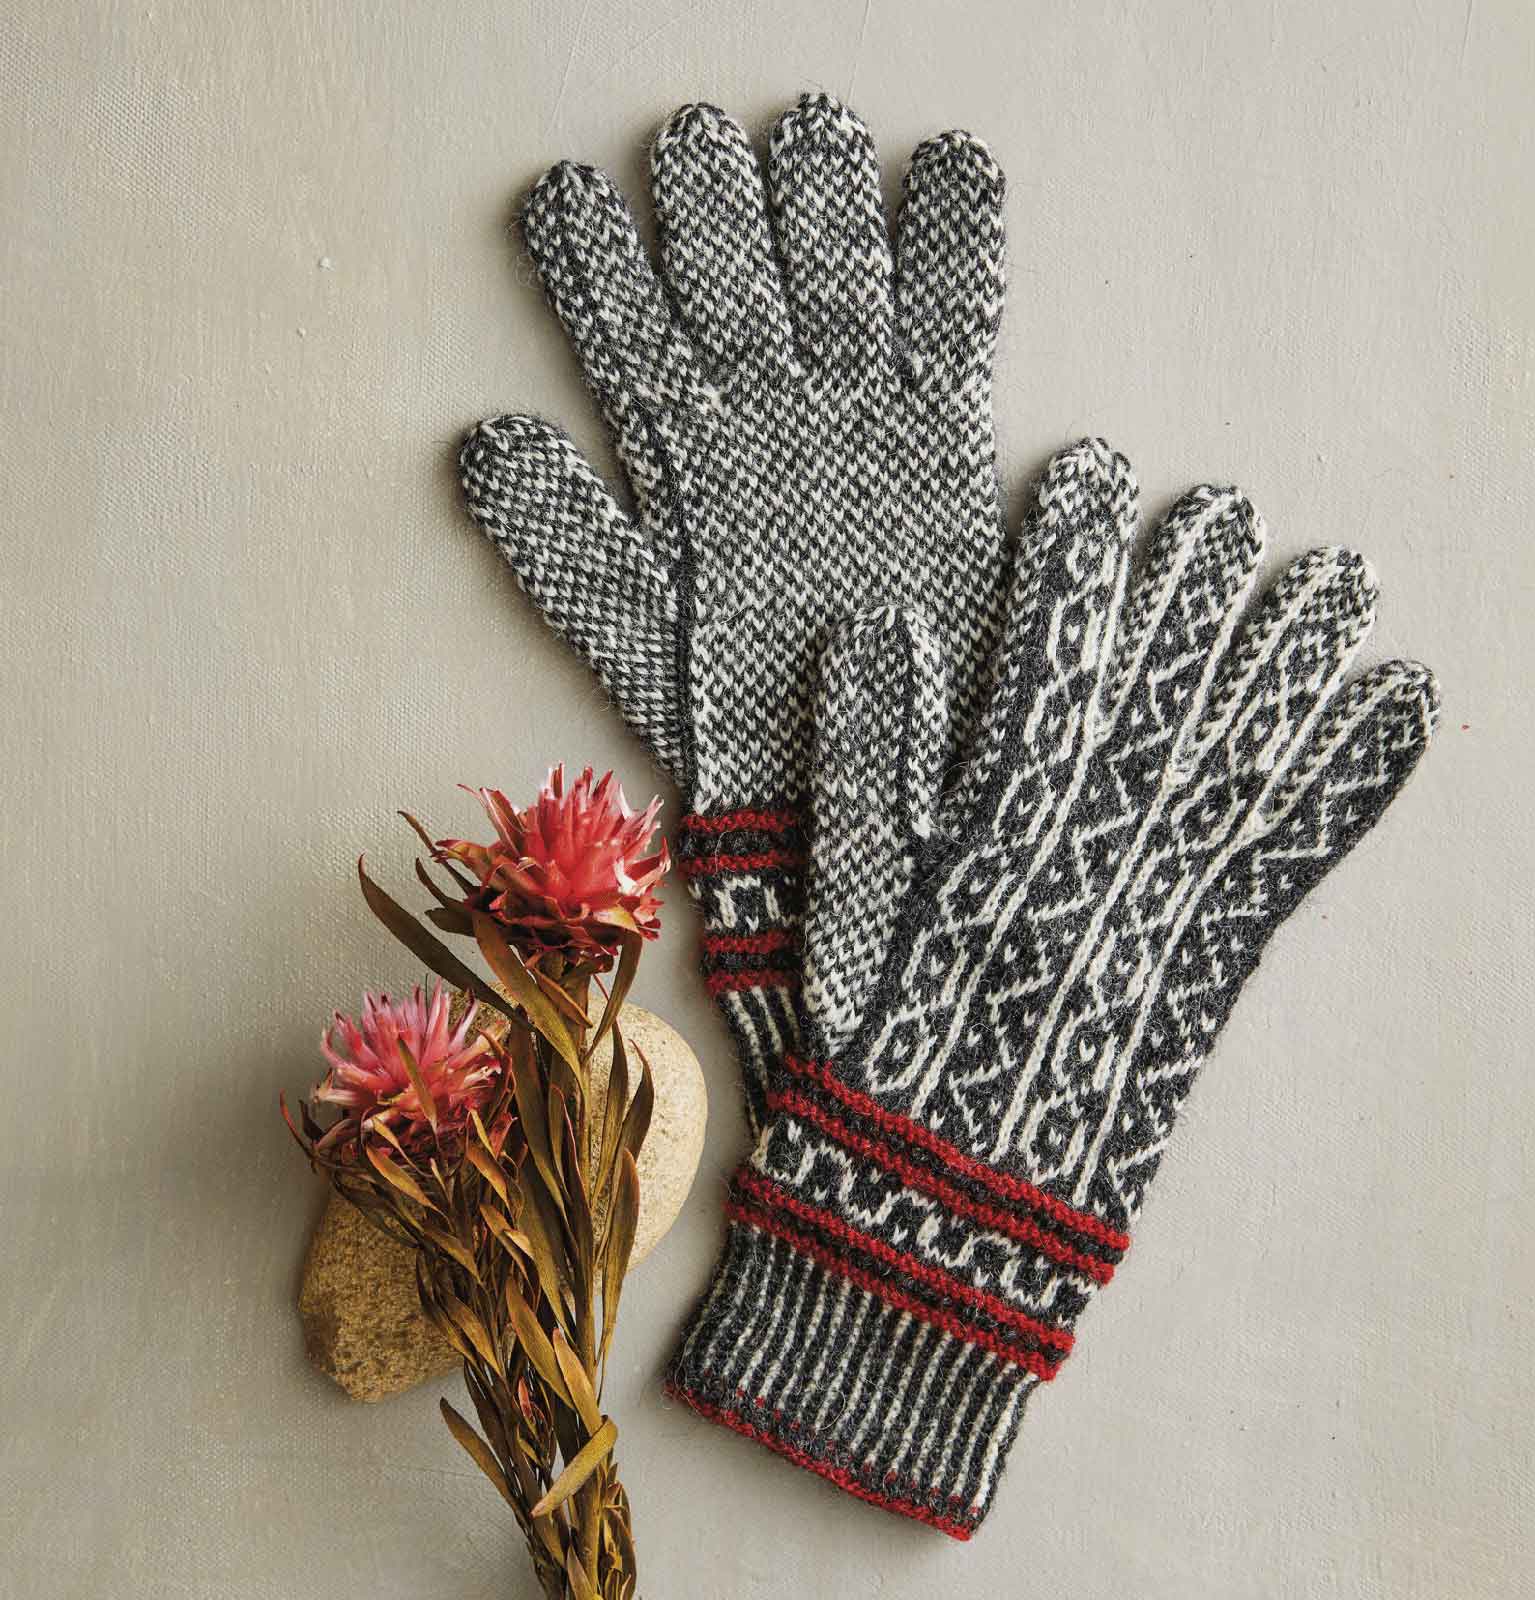 A Modern Take on Vintage Knitted Gloves: The Magpie Gloves | PieceWork